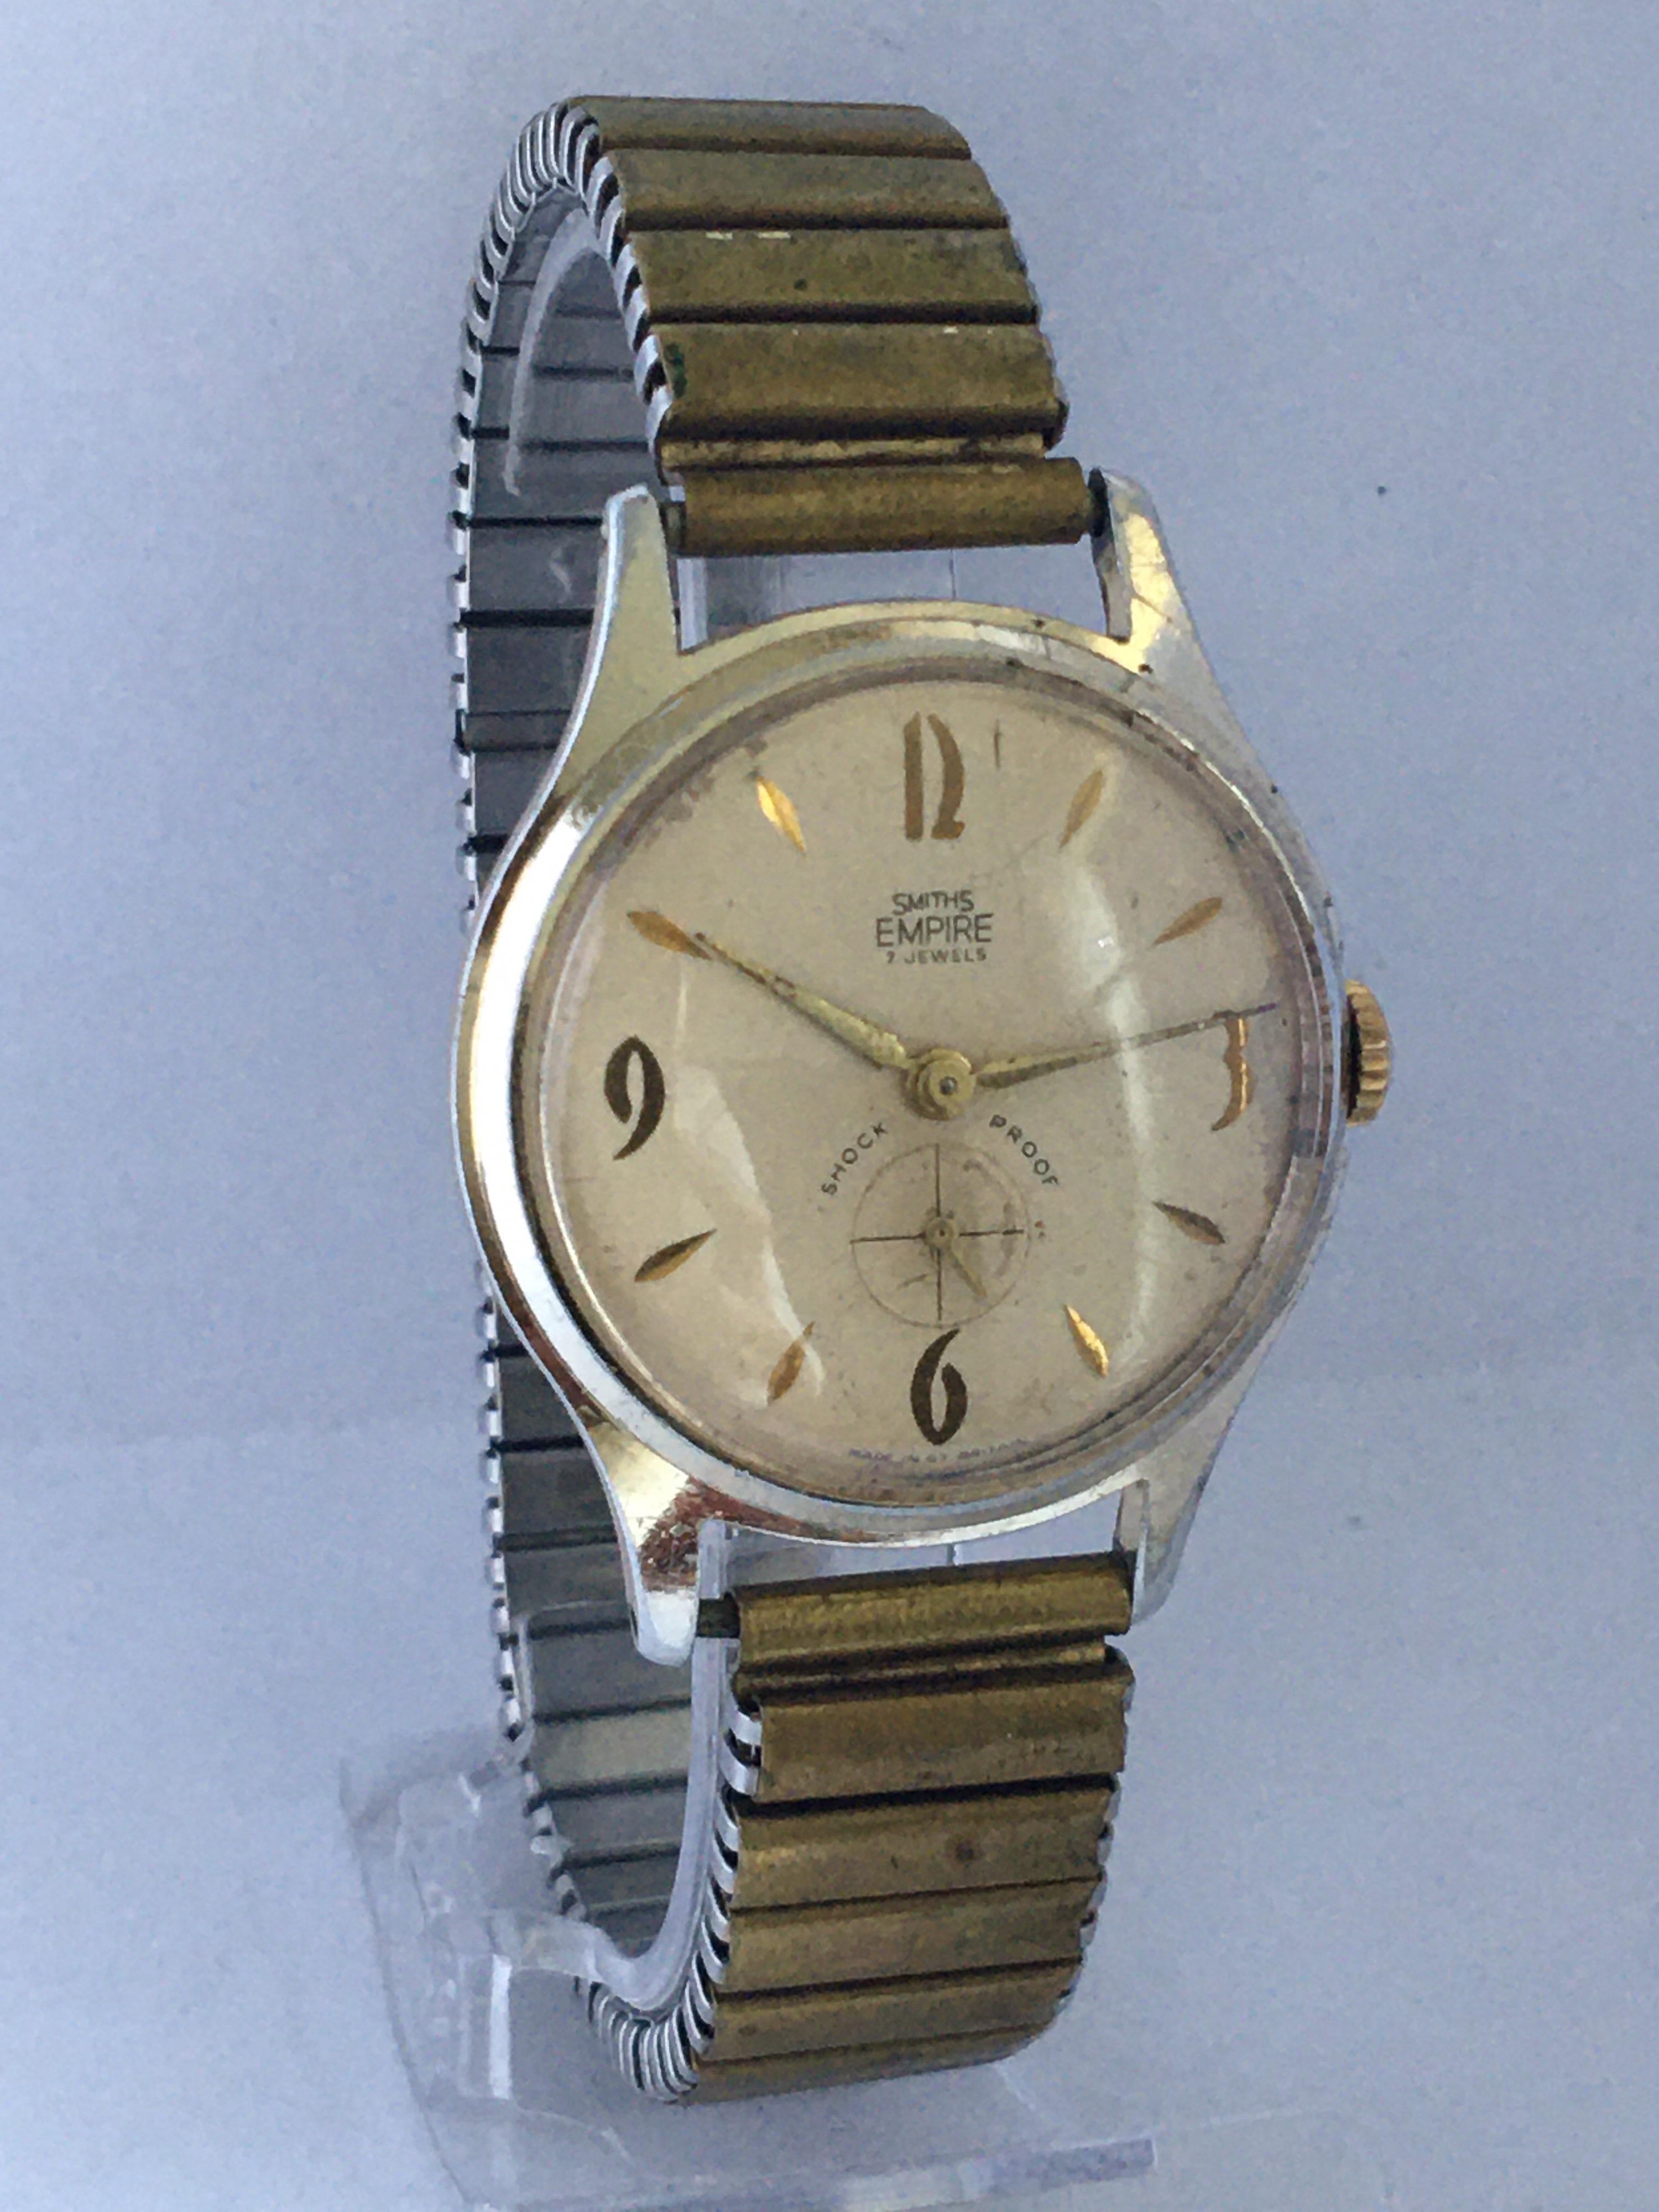 Vintage 1960s Smiths Empire Manual Winding Watch For Sale 6